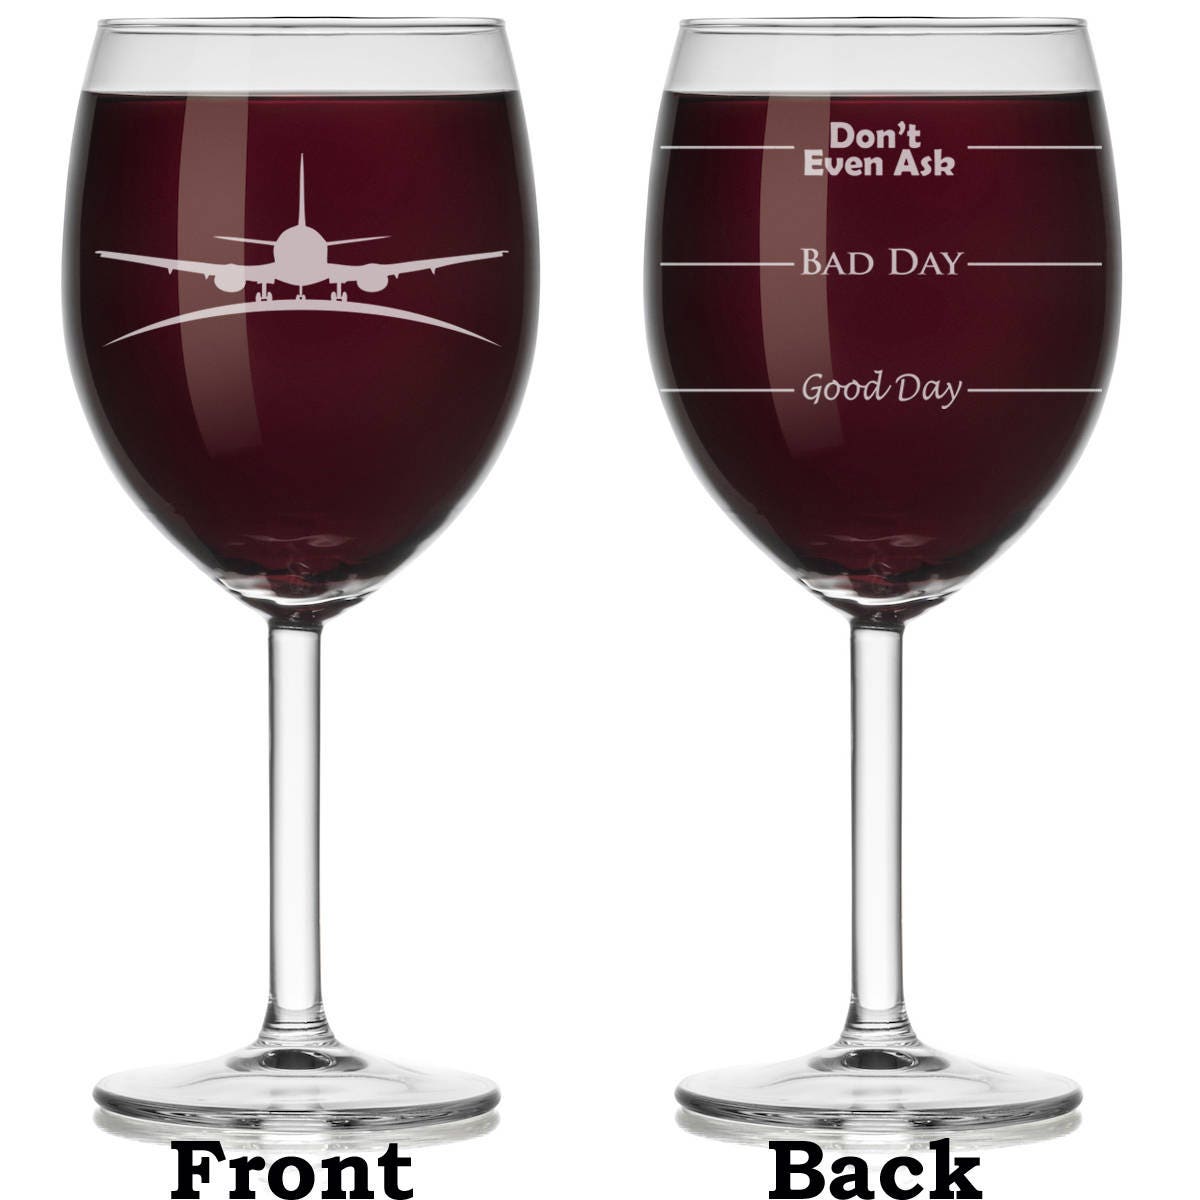 10 oz Wine Glass Goblet Two Sided Good Day Bad Day Dont Even Ask Airplane Pilot Flight Attendant 